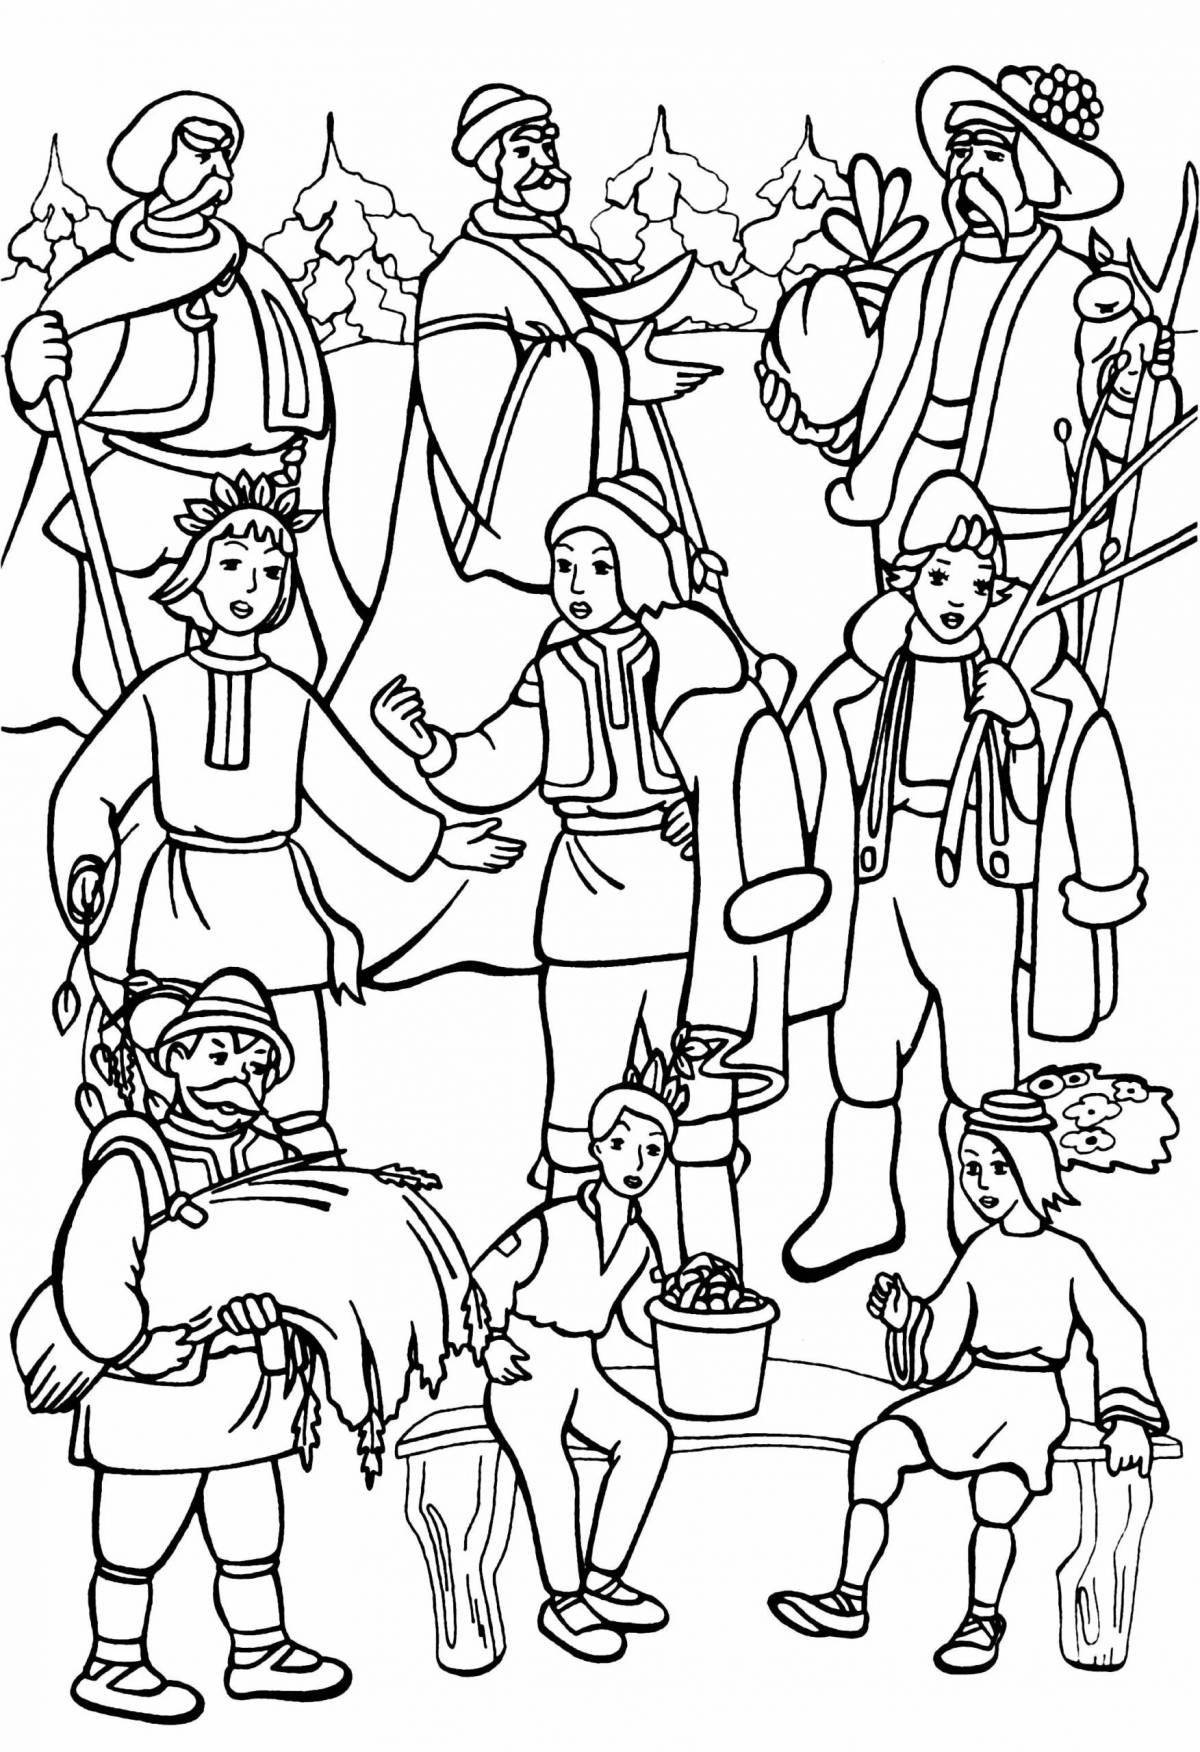 Creative coloring page 12